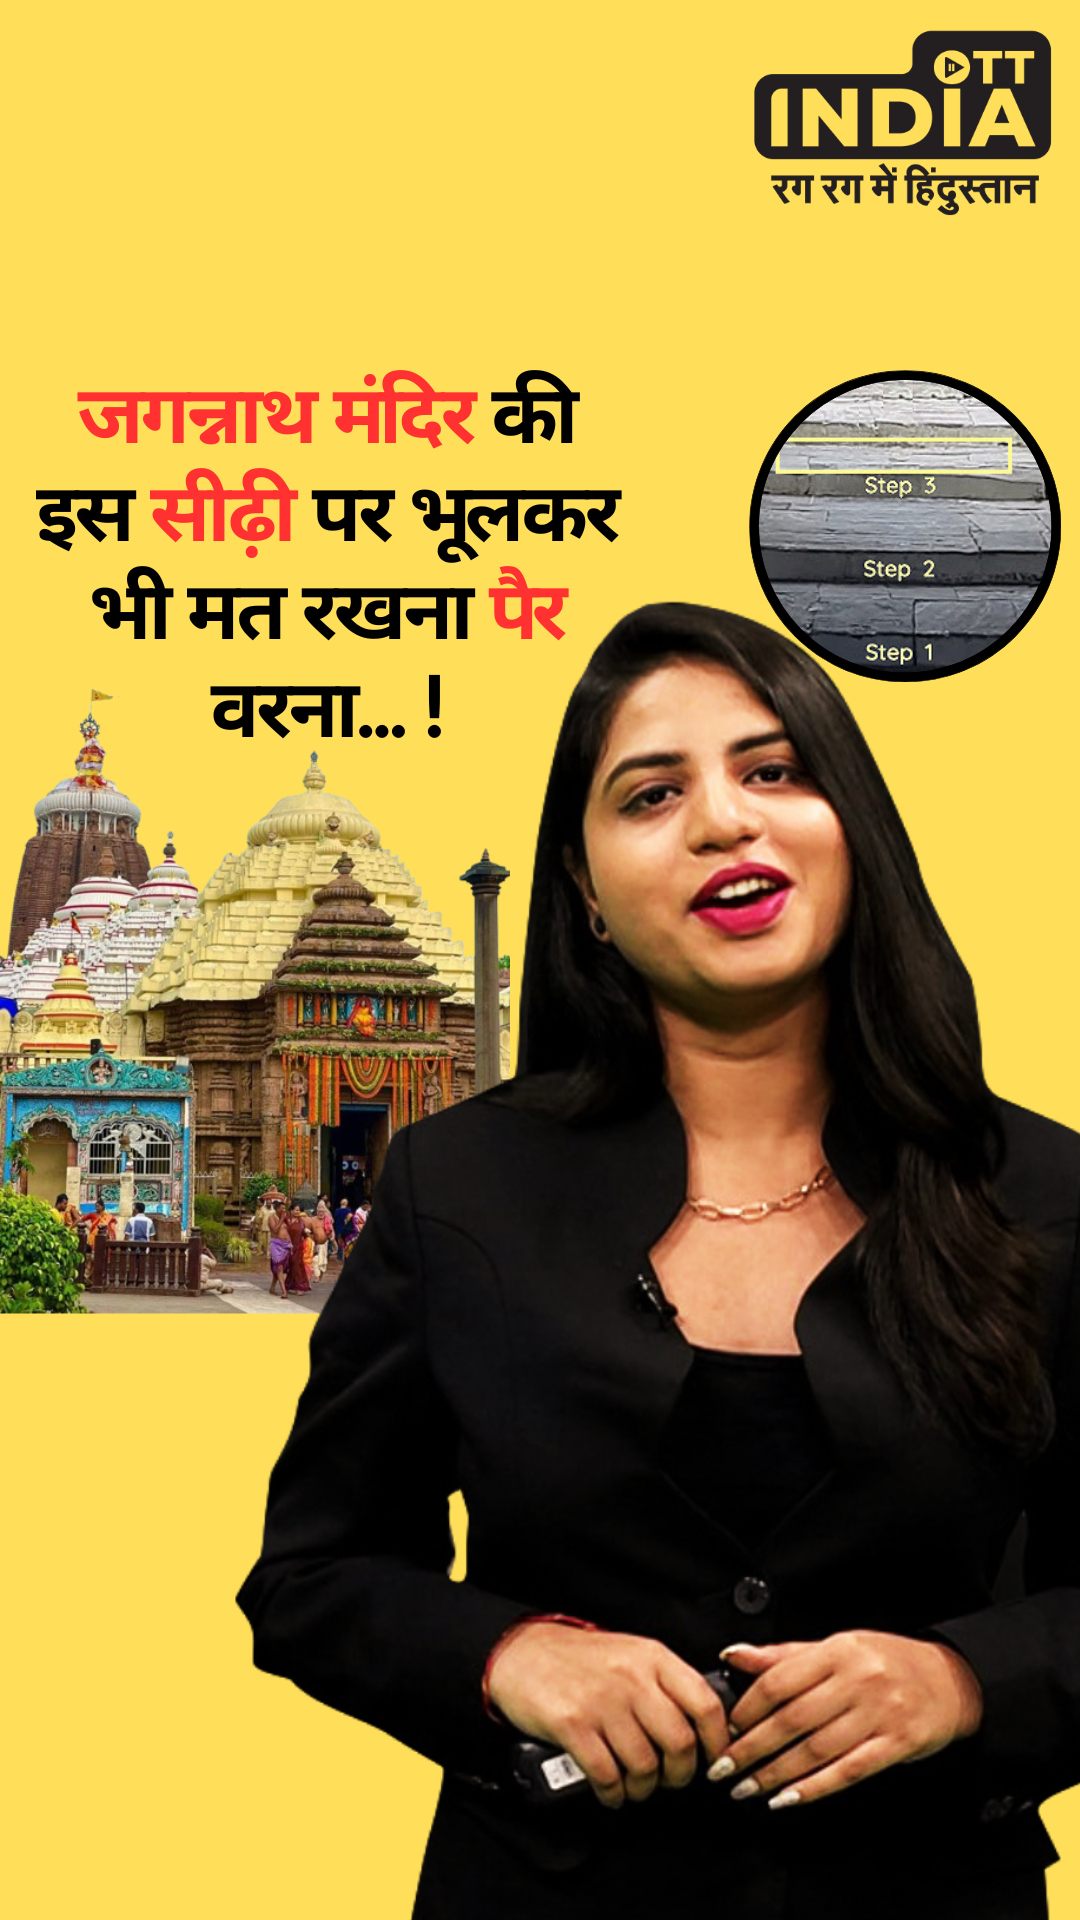 Jagannath Puri Temple Third Staircase Mystery: While leaving Jagannath Temple of Puri, do not step on the third staircase even by mistake...! Zara Hatke with Prerna